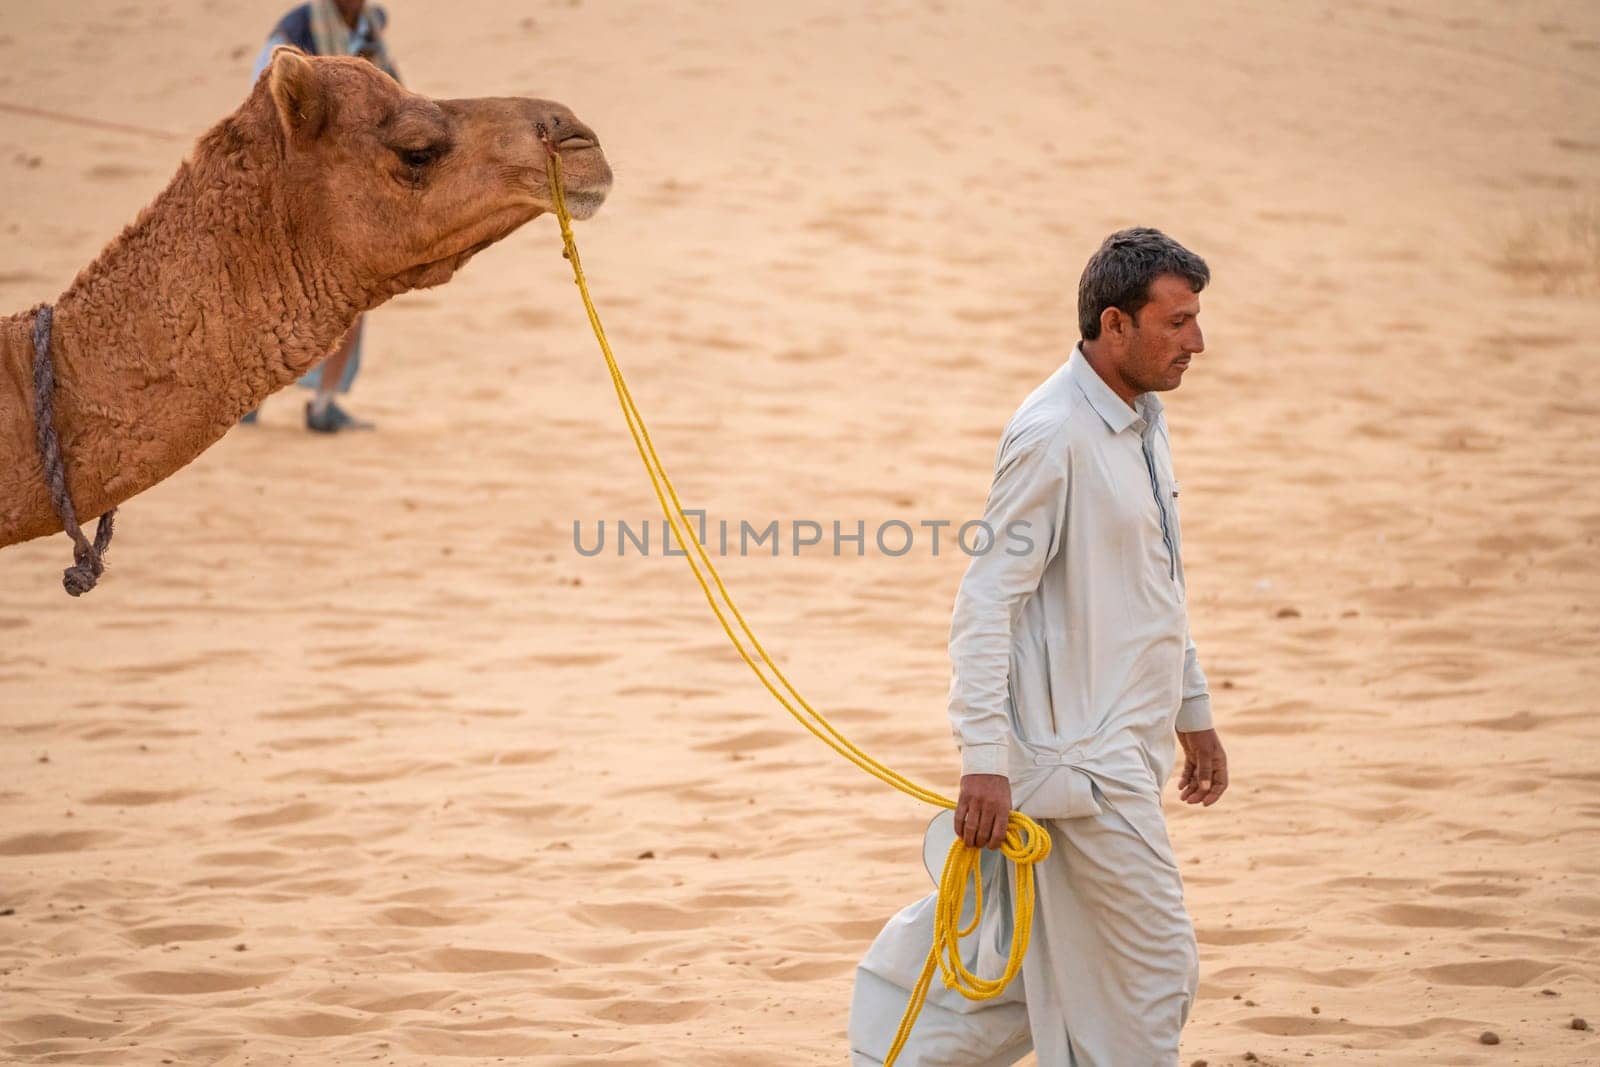 man in traditional kurta pyjama dress leading camel in the middle of sand dunes searching for tourists on a desert safari by Shalinimathur